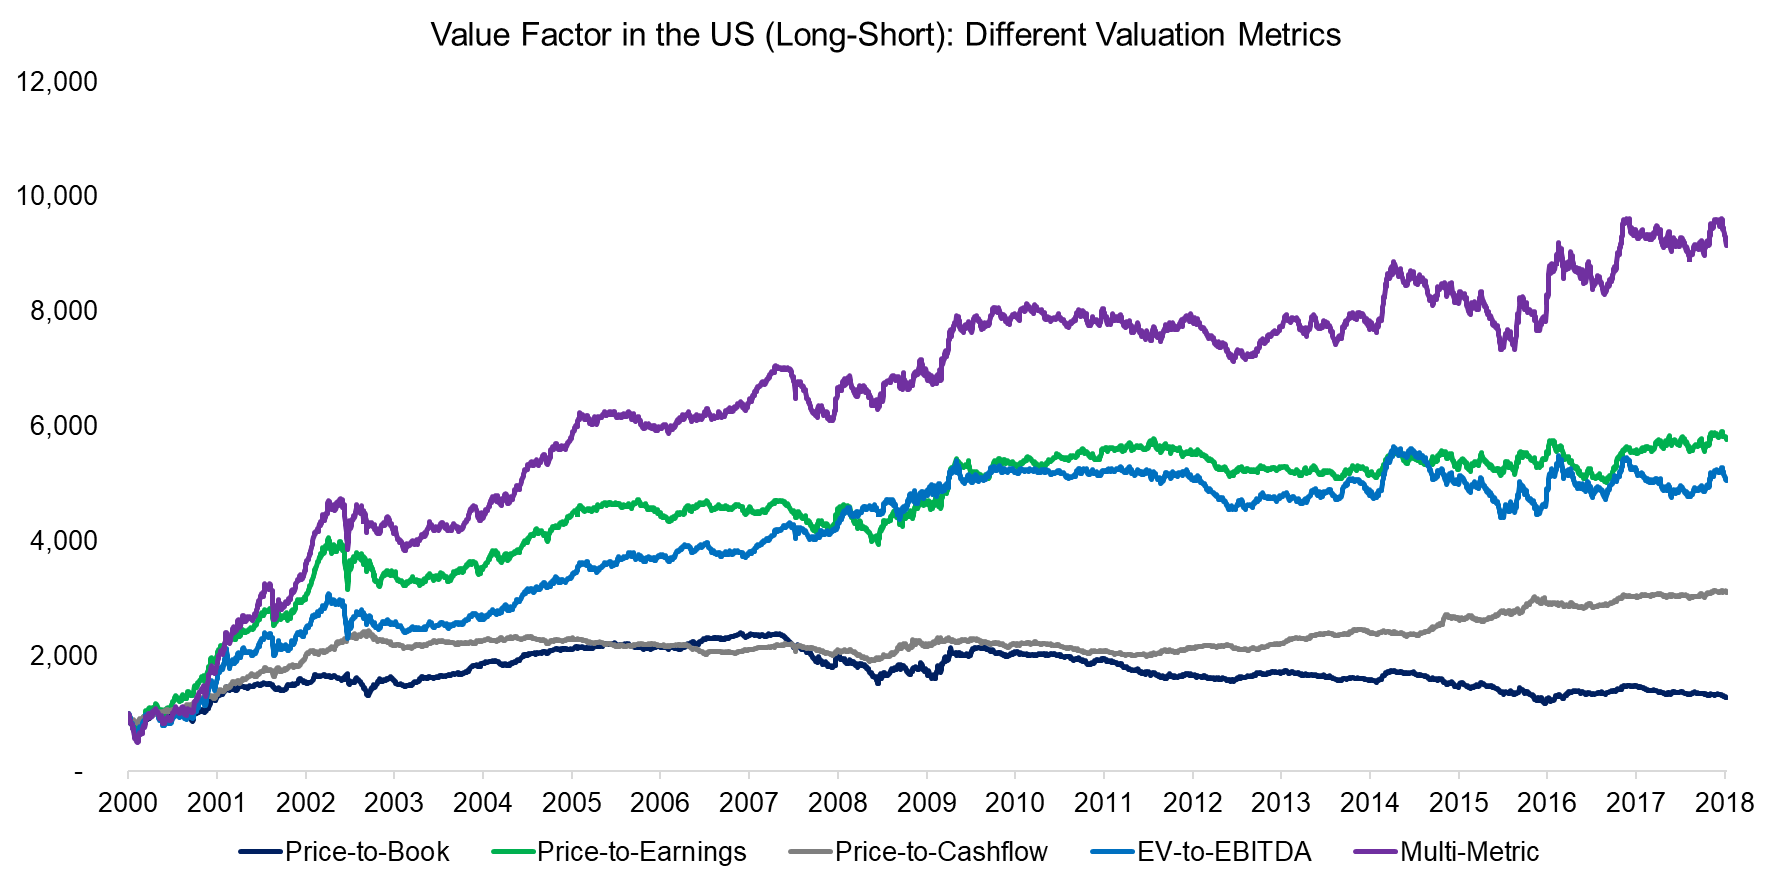 Value Factor in the US (Long-Short) Different Valuation Metrics